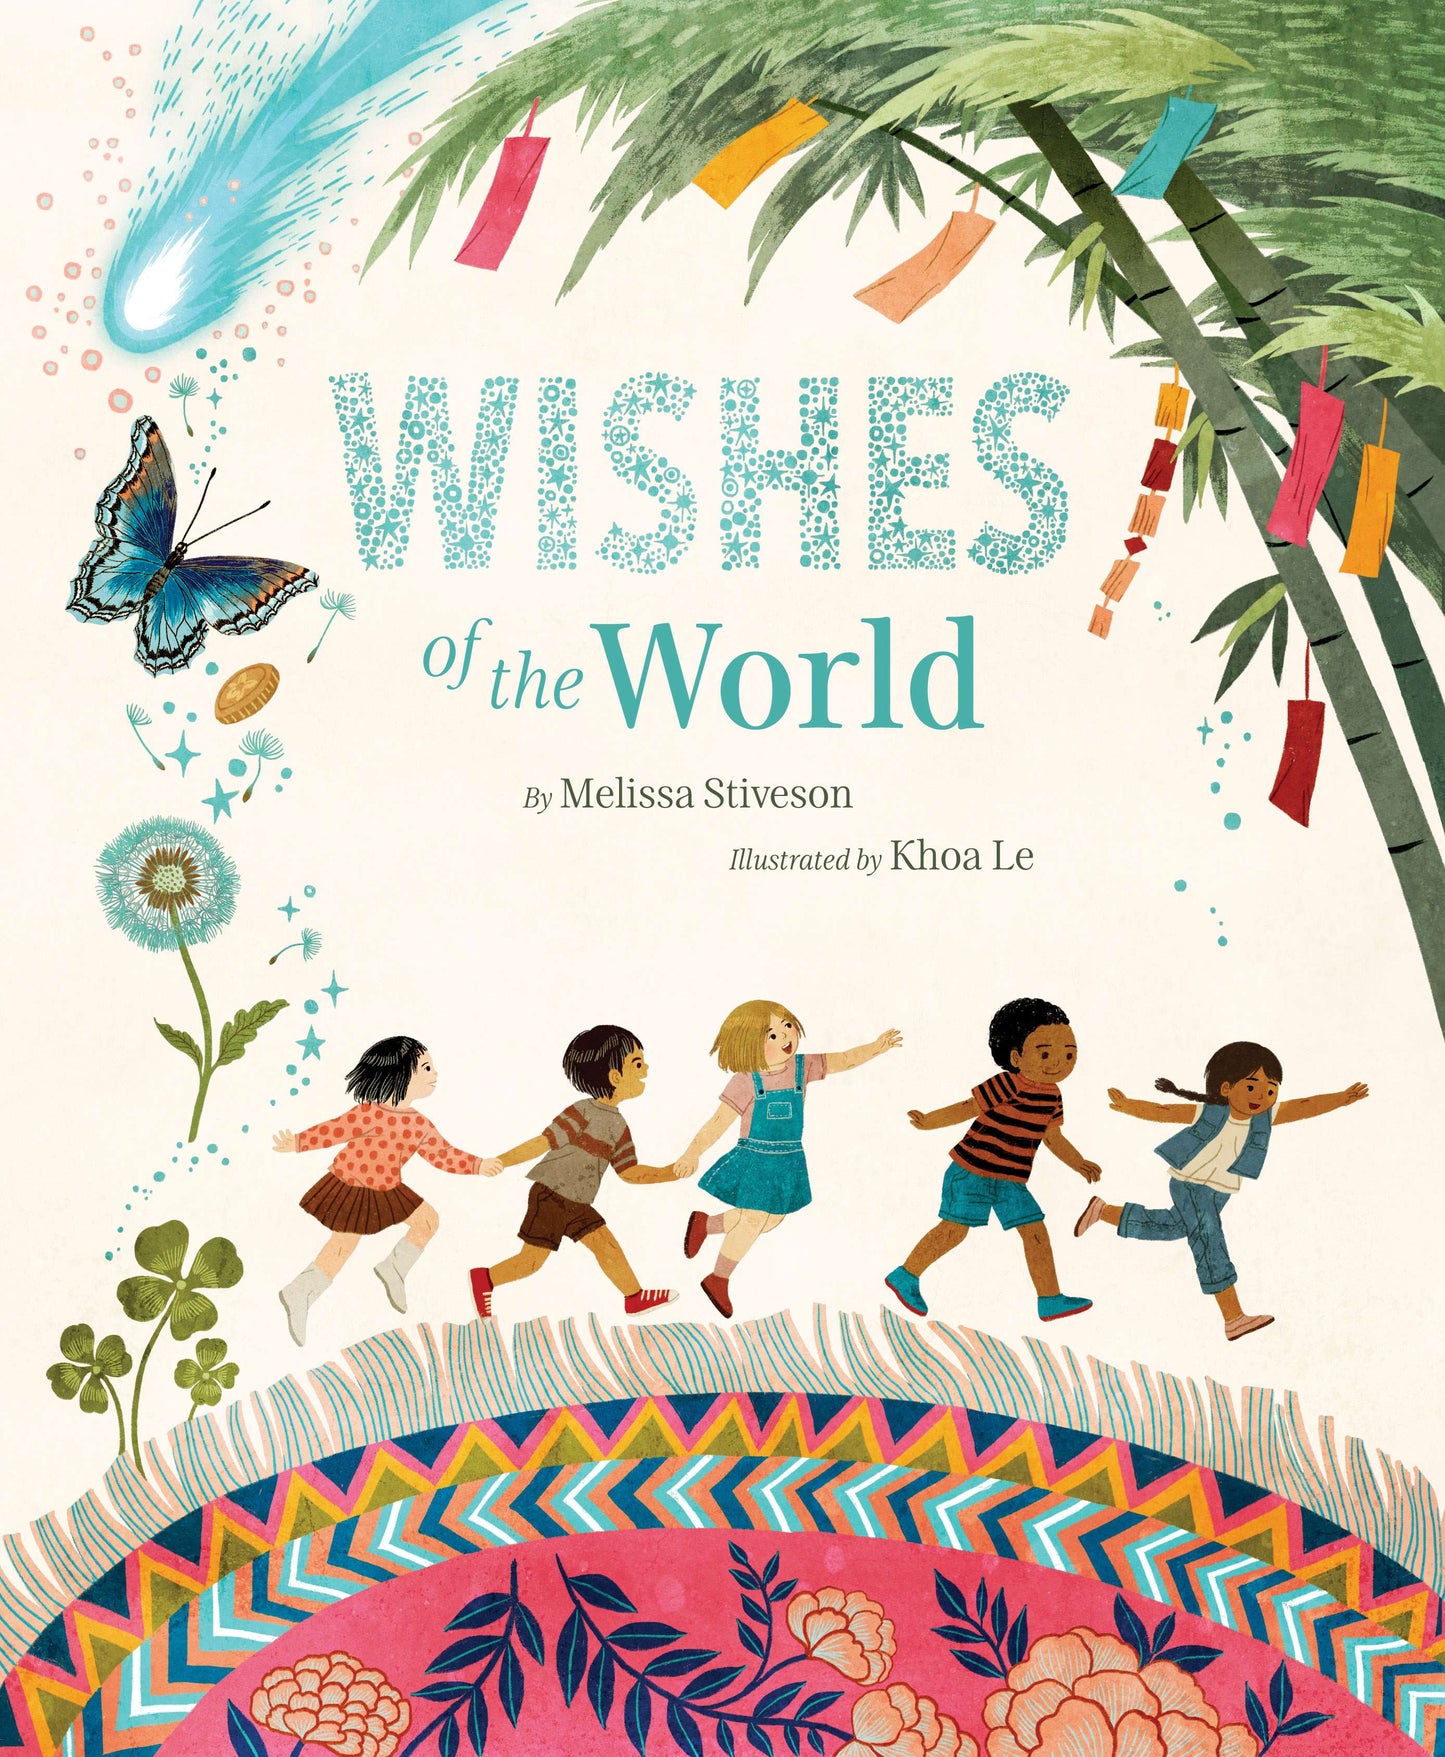 Wishes of the World by Melissa Stiveson (Hardcover)